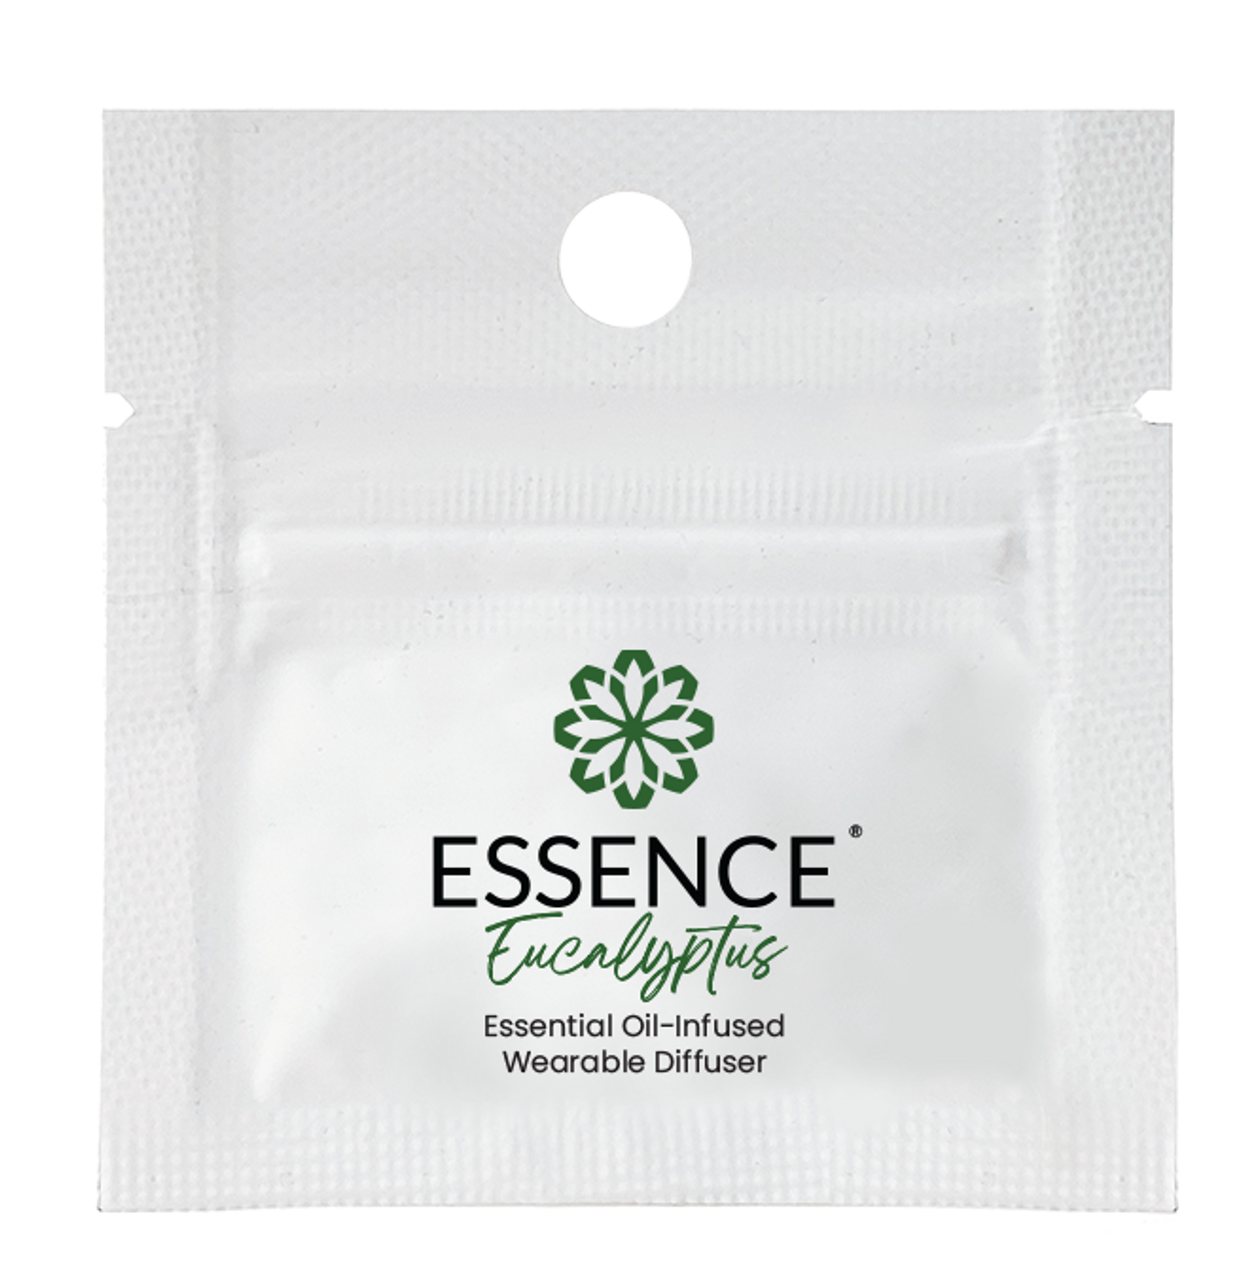 Essence Eucalyptus Wearable Essential Oil Diffuser Front